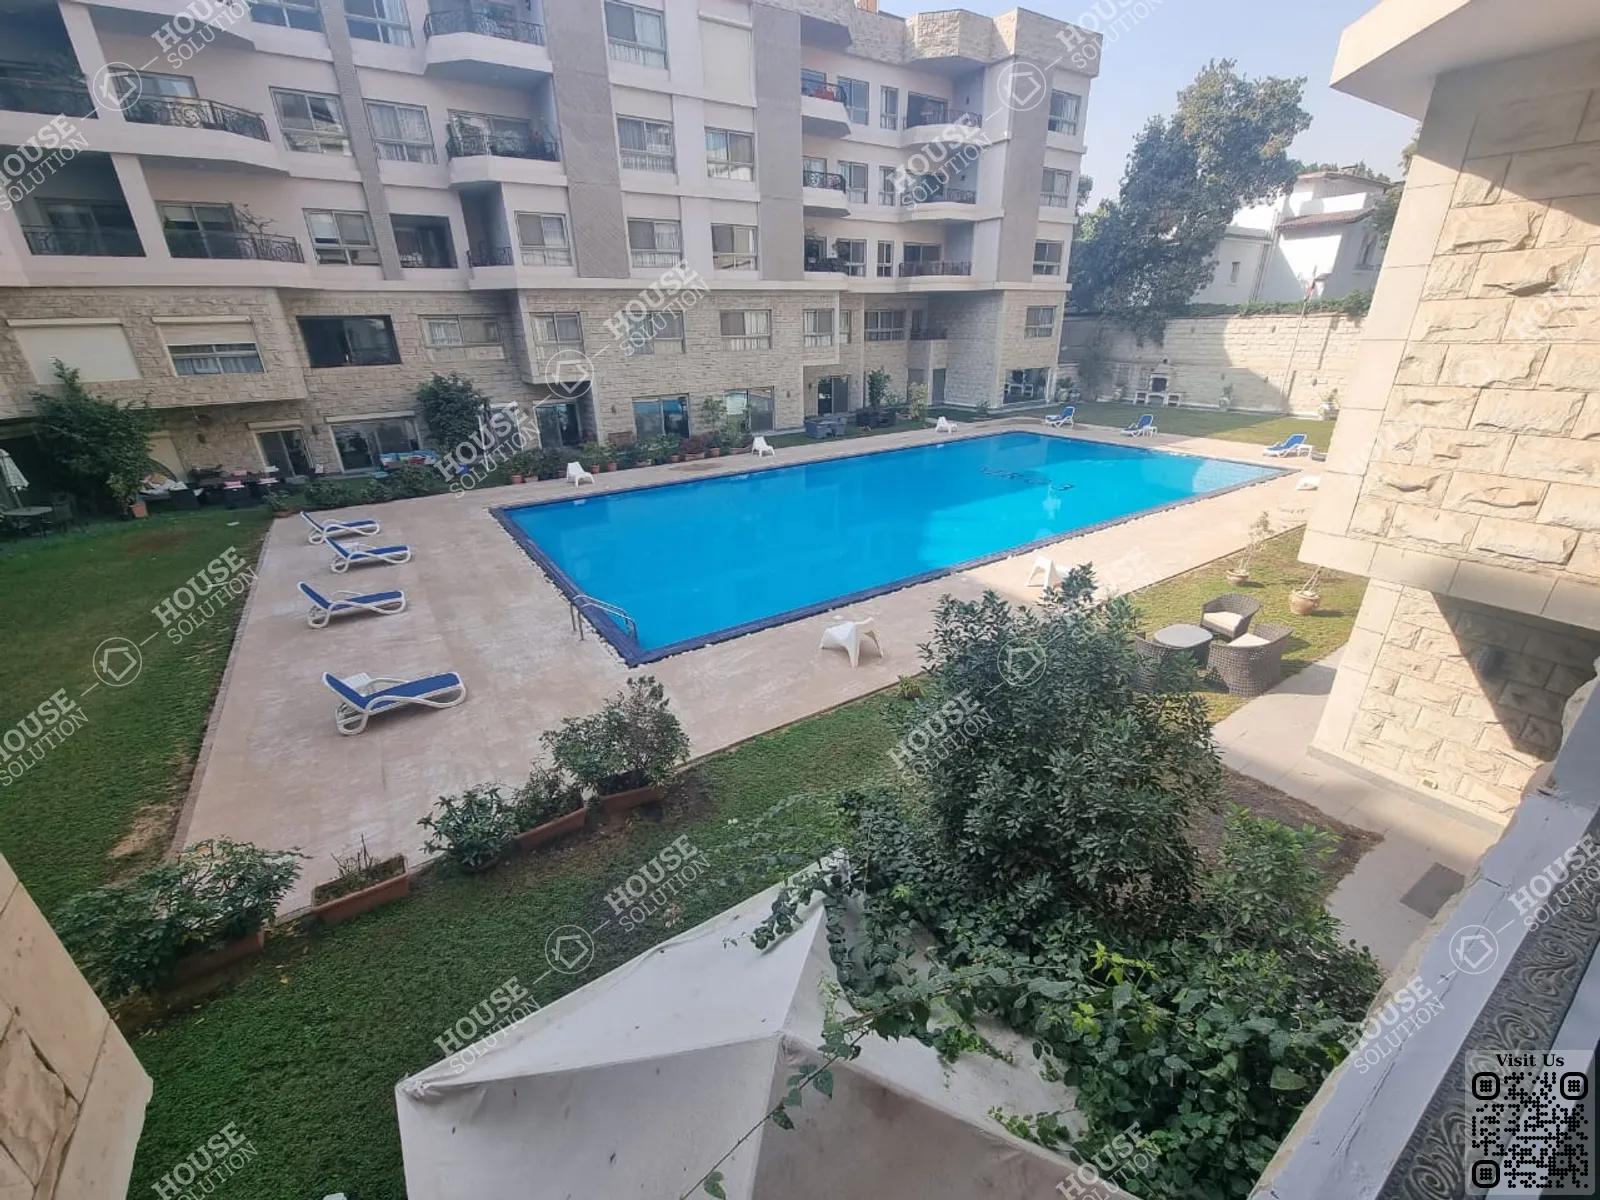 SHARED SWIMMING POOL  @ Apartments For Rent In Maadi Maadi Sarayat Area: 160 m² consists of 2 Bedrooms 1 Bathrooms Furnished 5 stars #3884-2